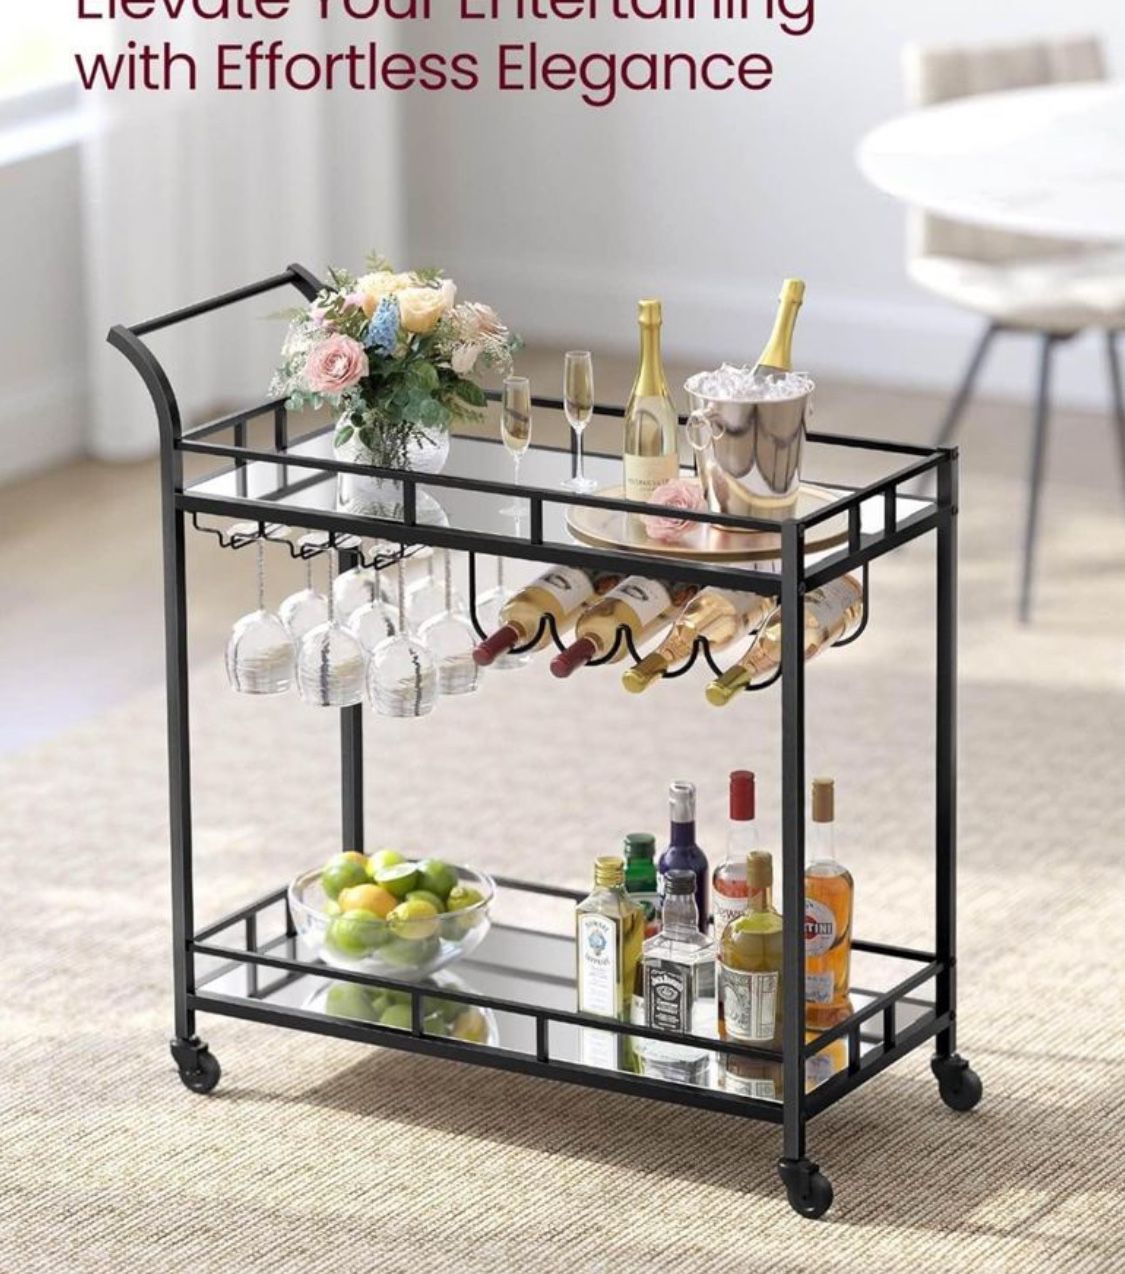 Bar Cart Black, Home Bar Serving Cart, Wine Cart with 2 Mirrored Shelves, Wine Holders, Glass Holders, for Kitchen, Dining Room, Black UL